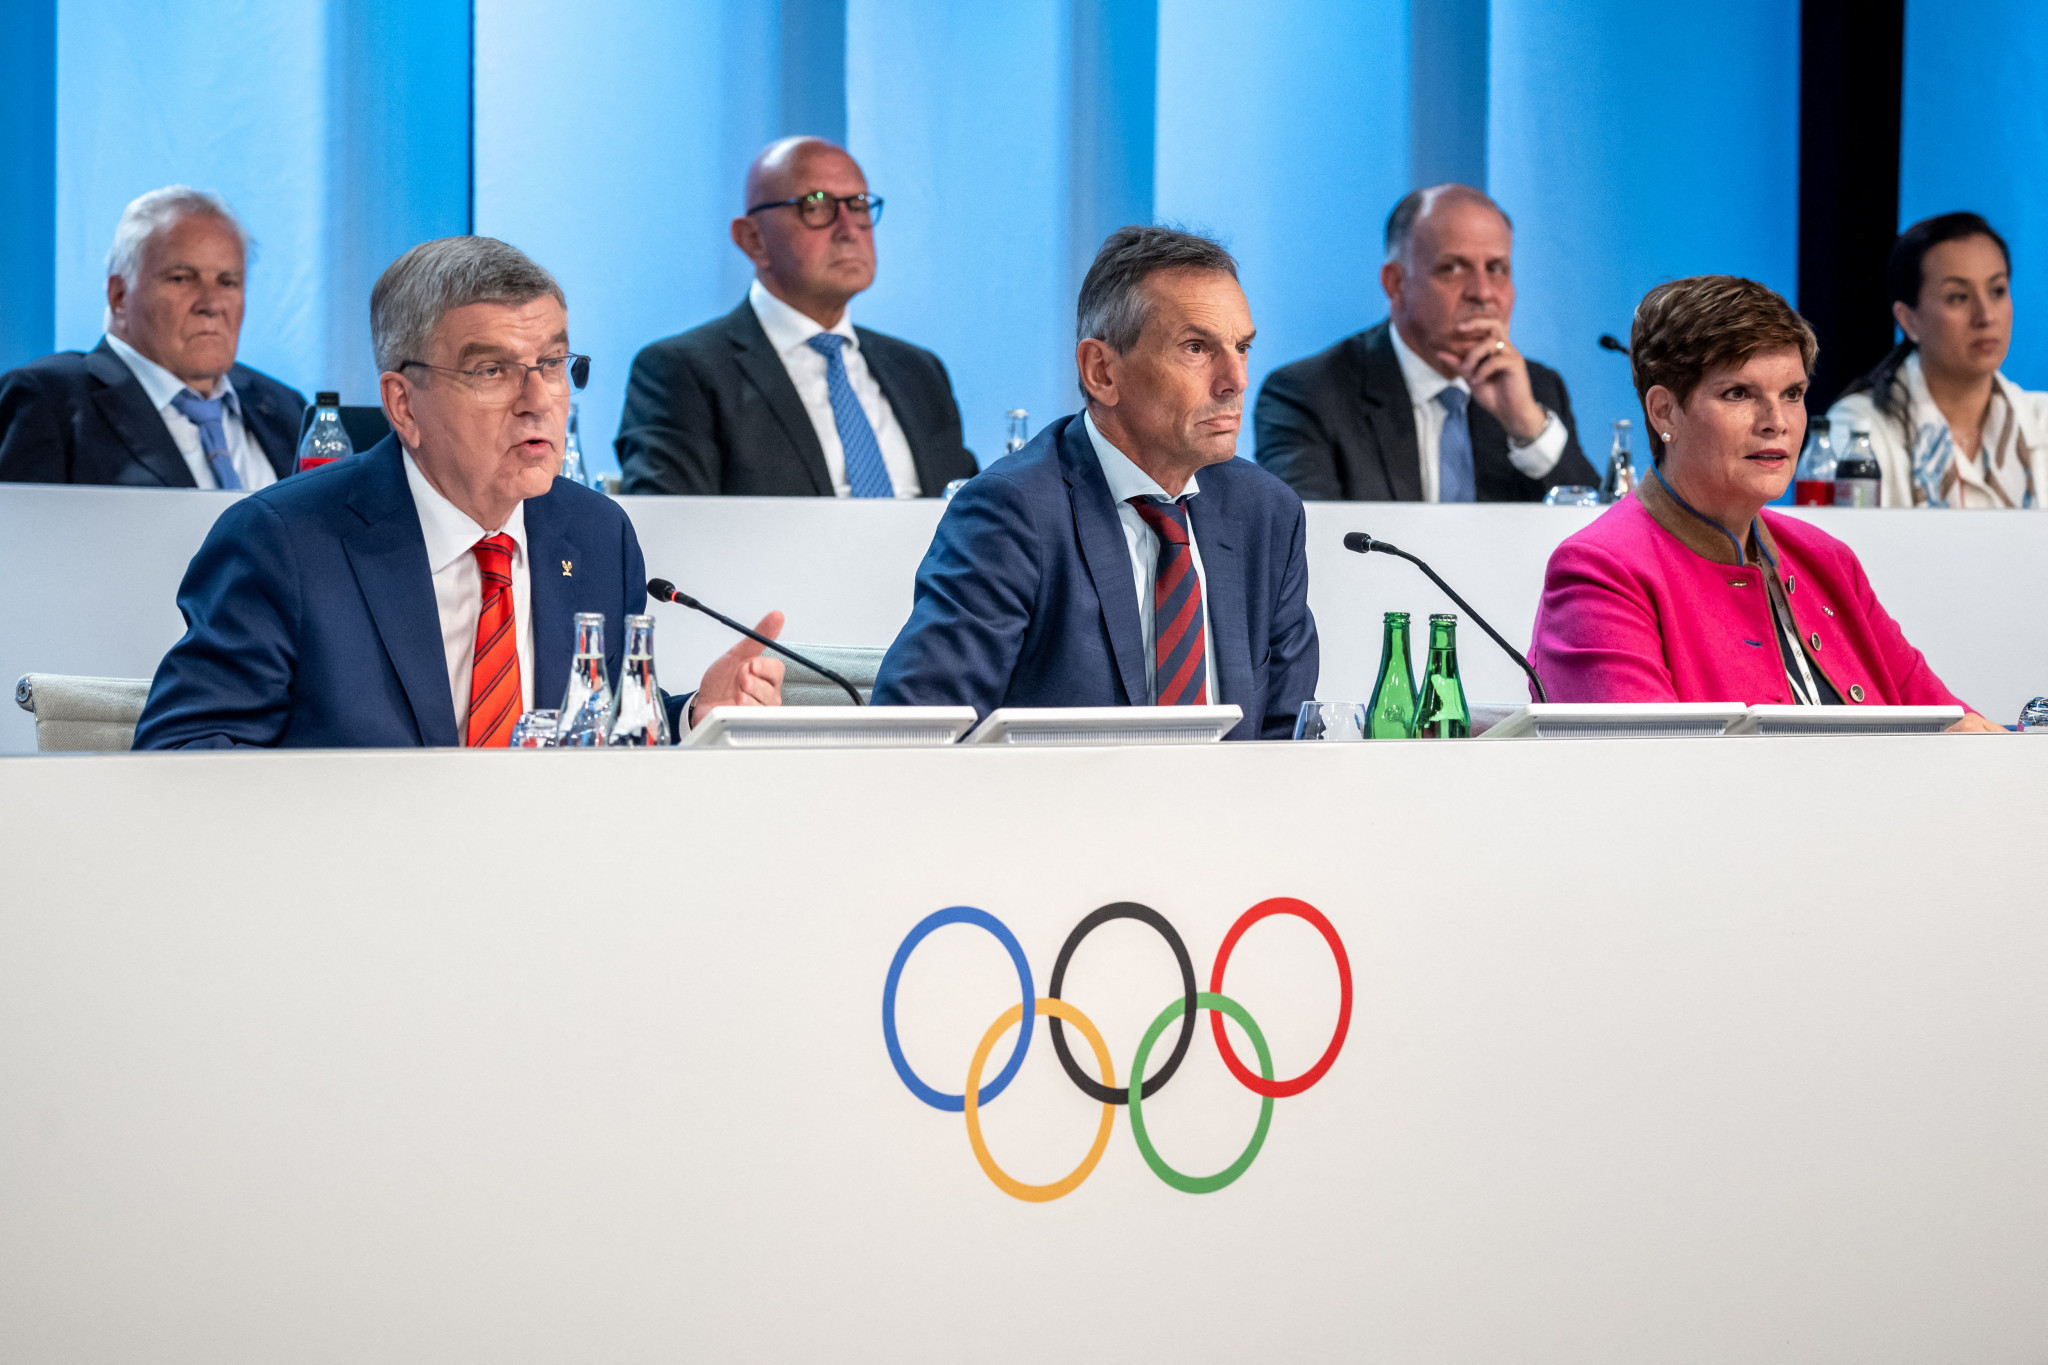 insidethegames is reporting LIVE on the 140th IOC Session